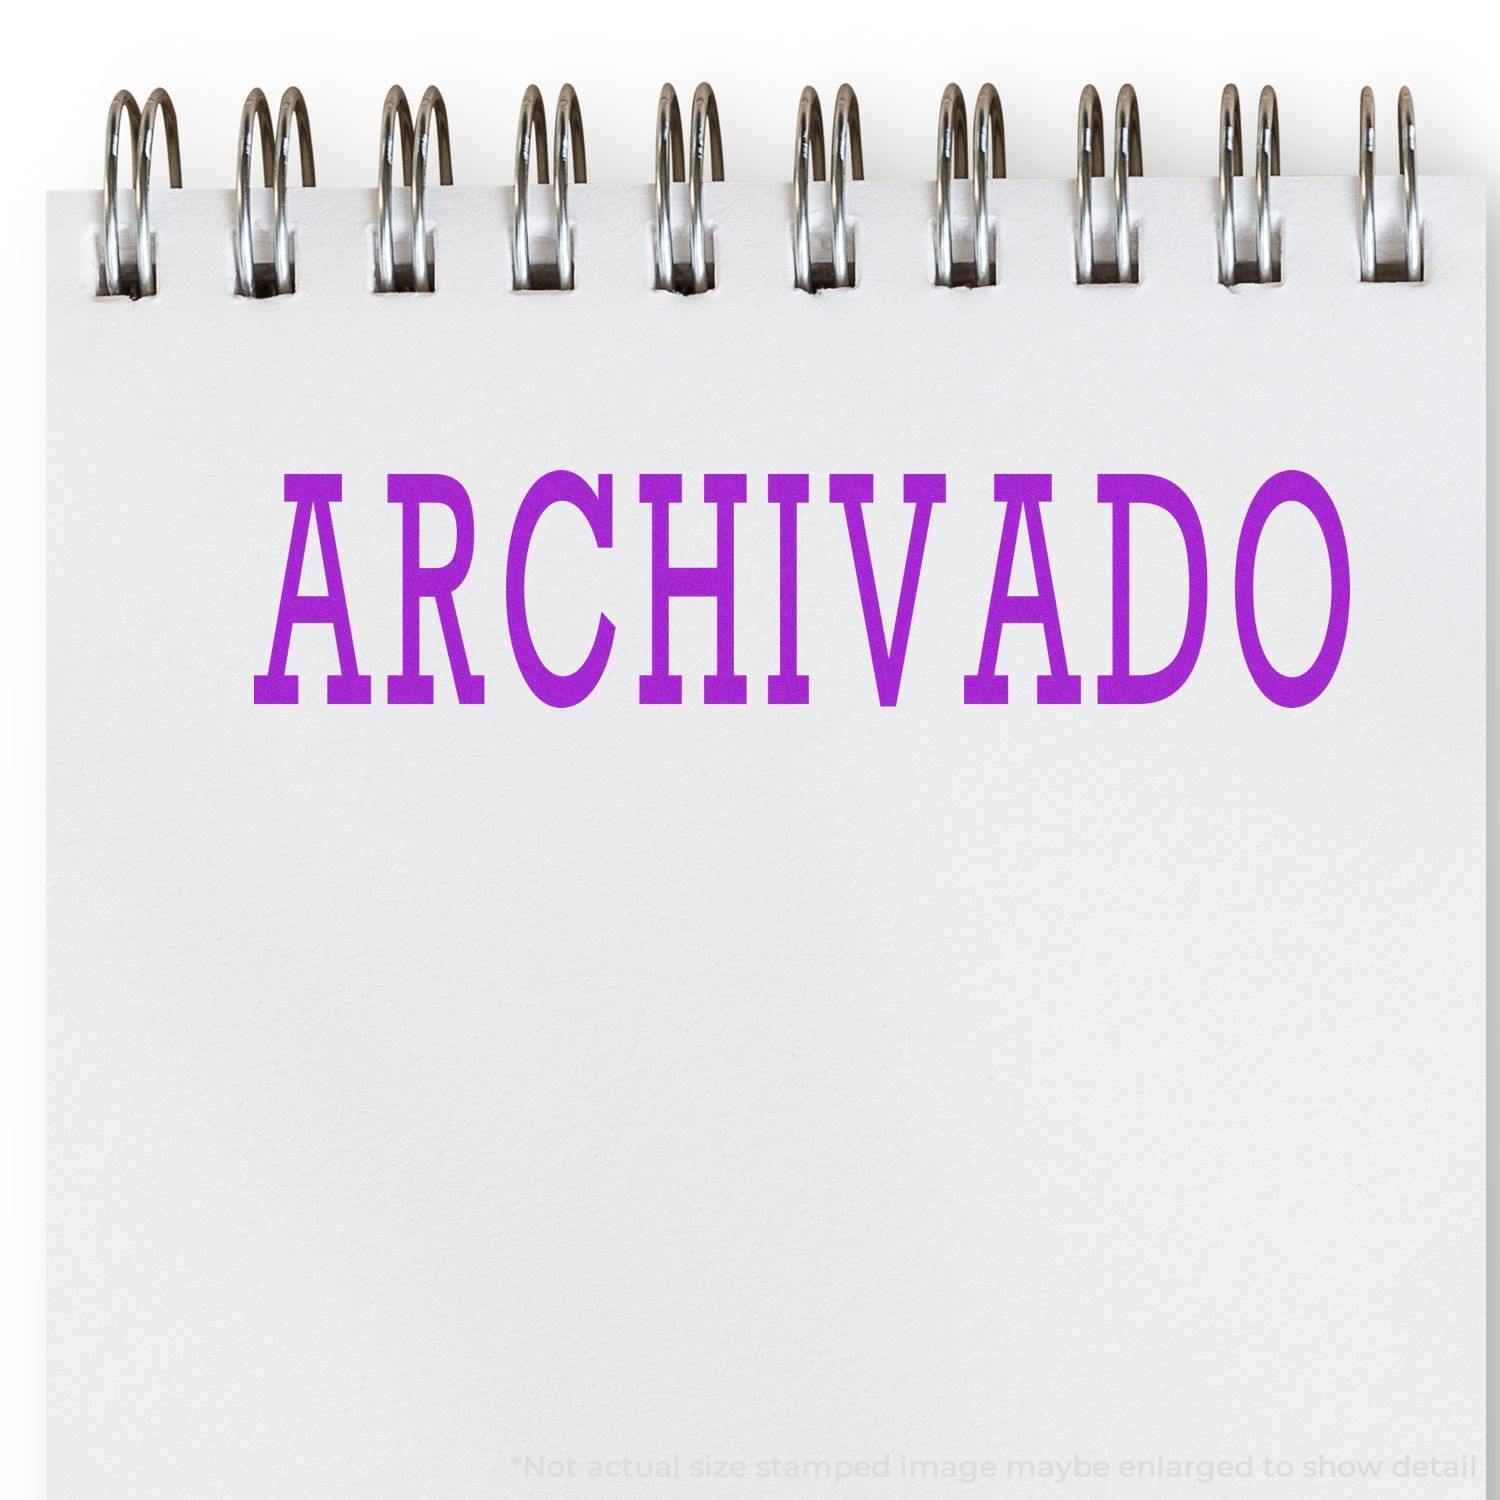 A self-inking stamp with a stamped image showing how the text "ARCHIVADO" is displayed after stamping.